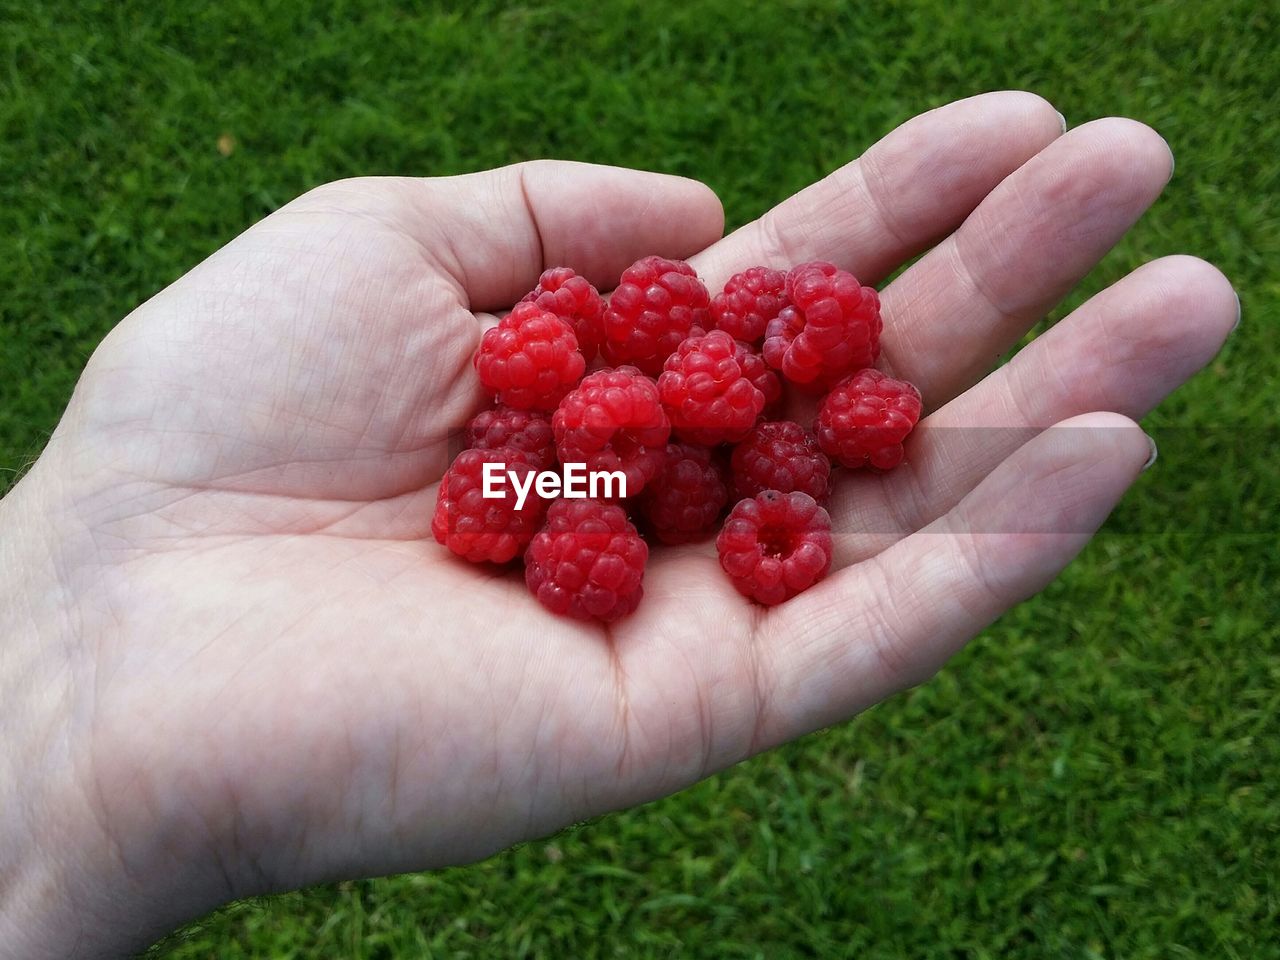 Cropped image of hand holding raspberries on grassy field